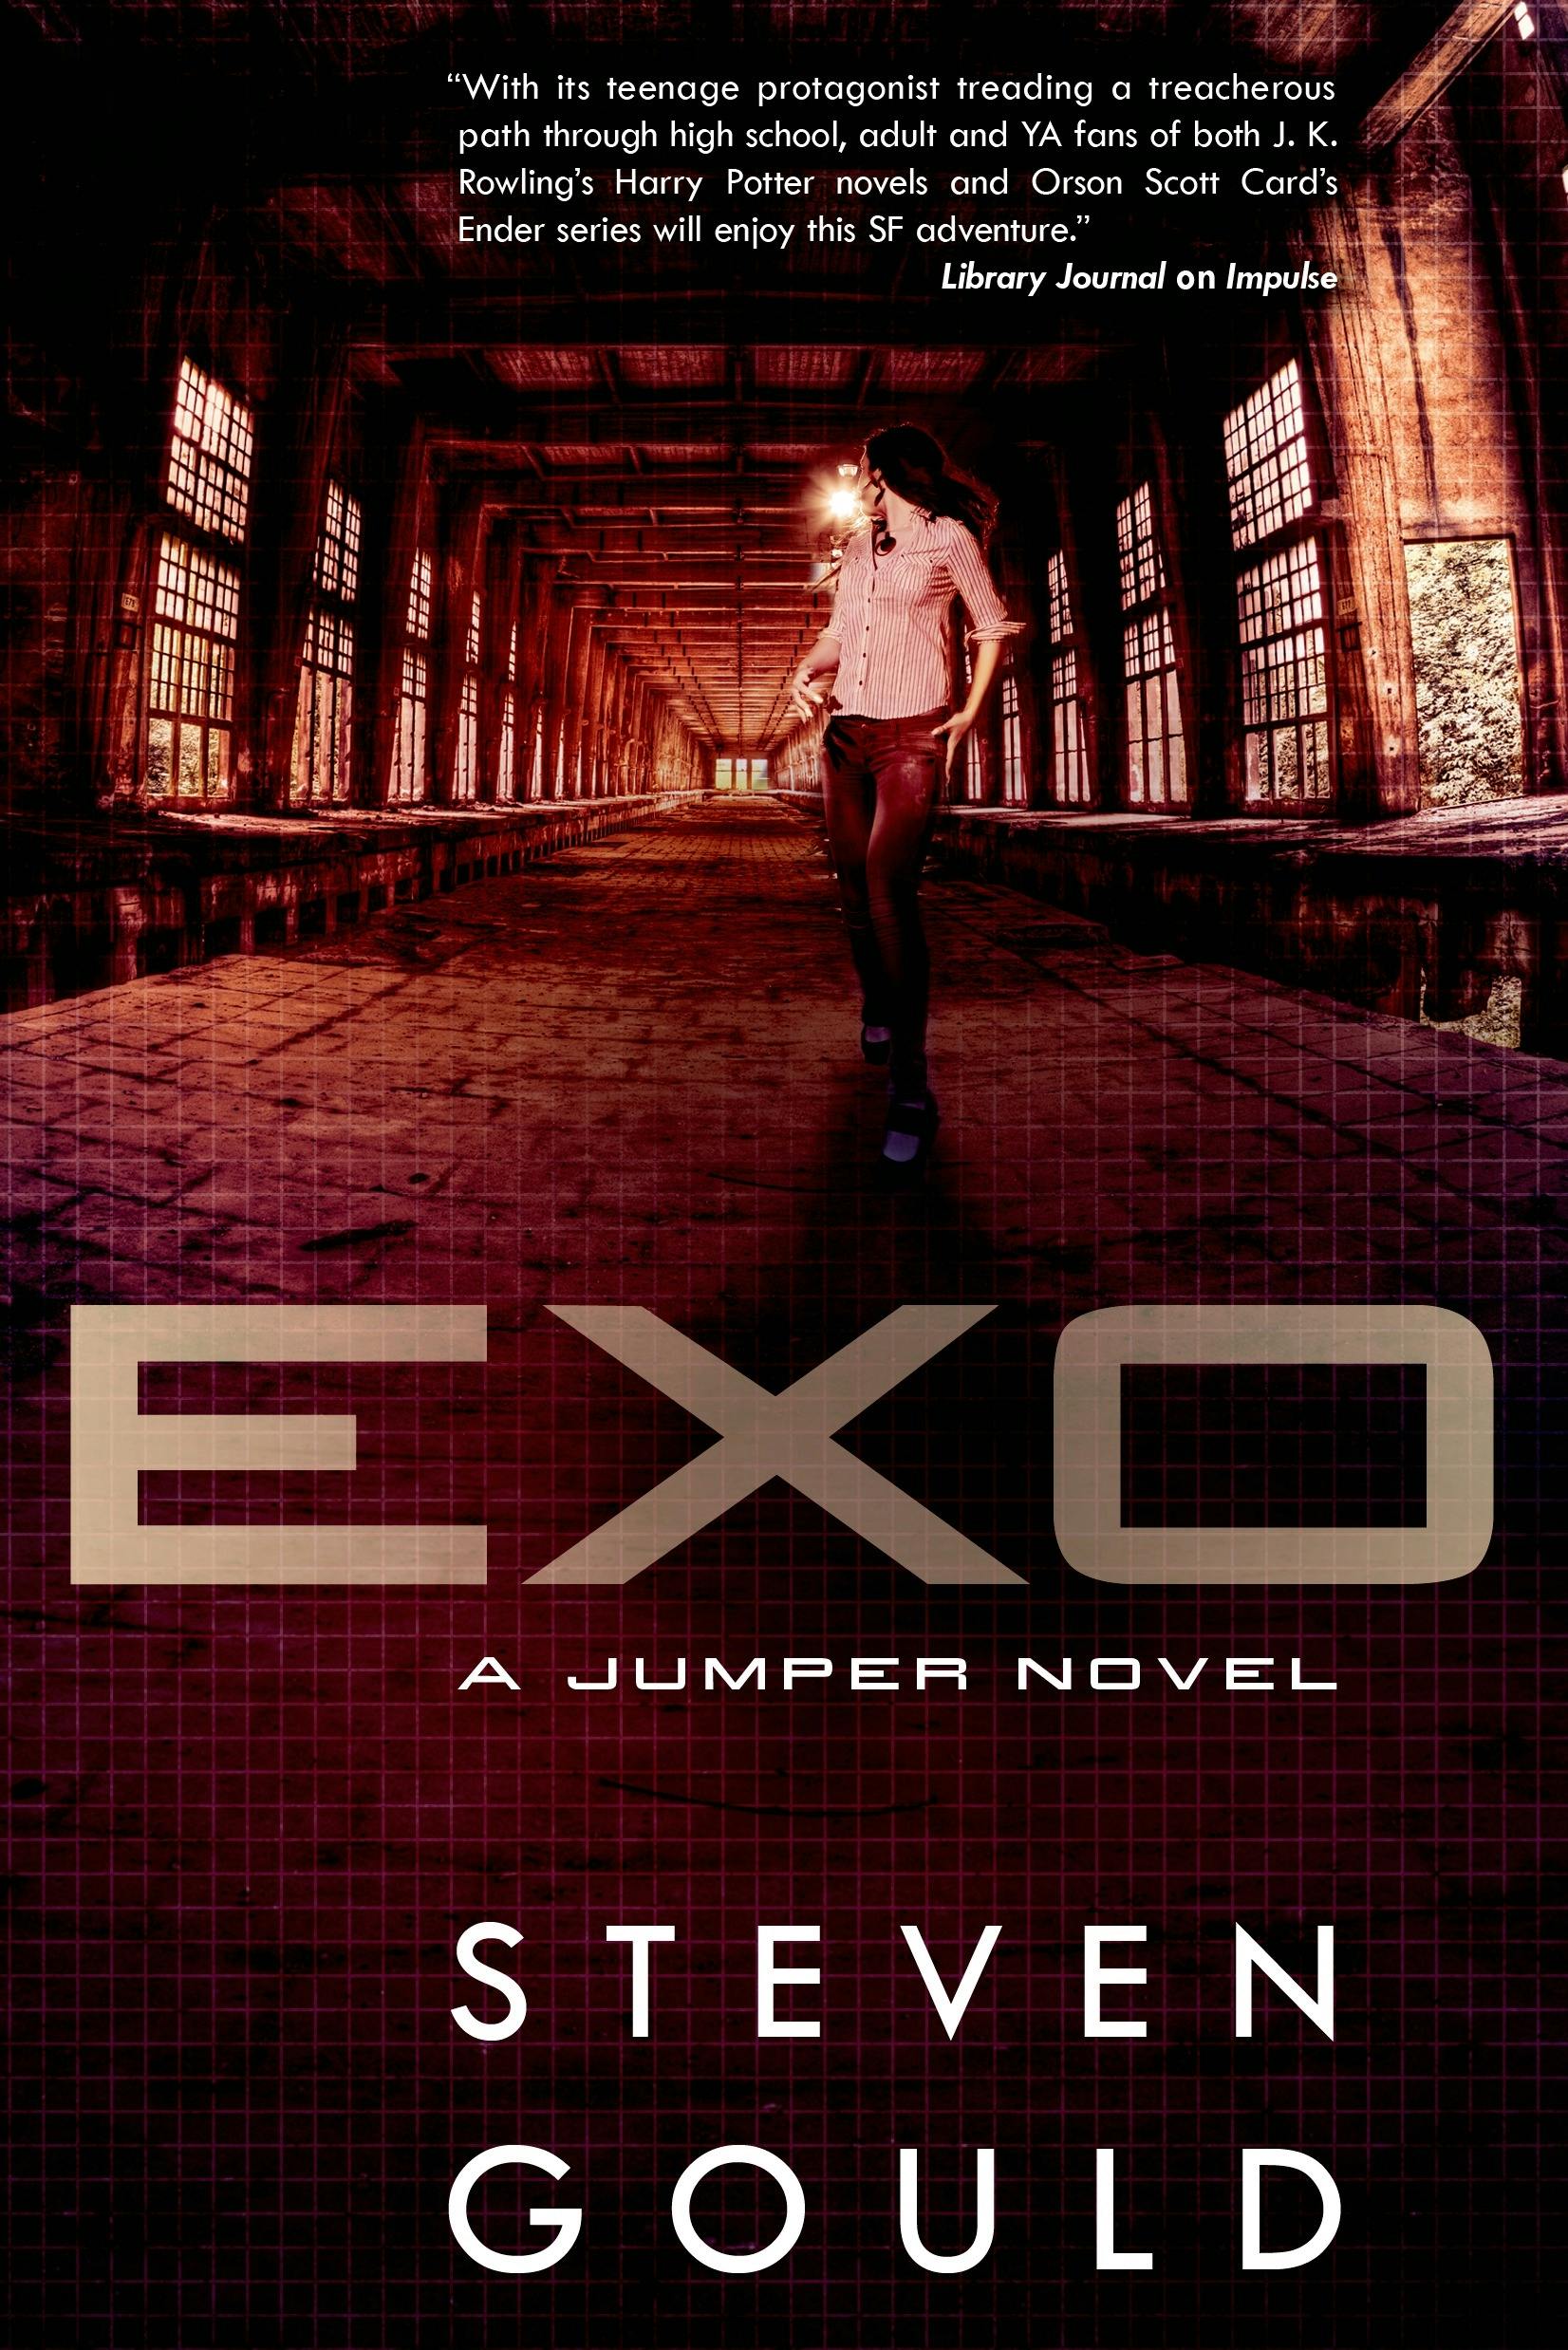 Cover for the book titled as: Exo